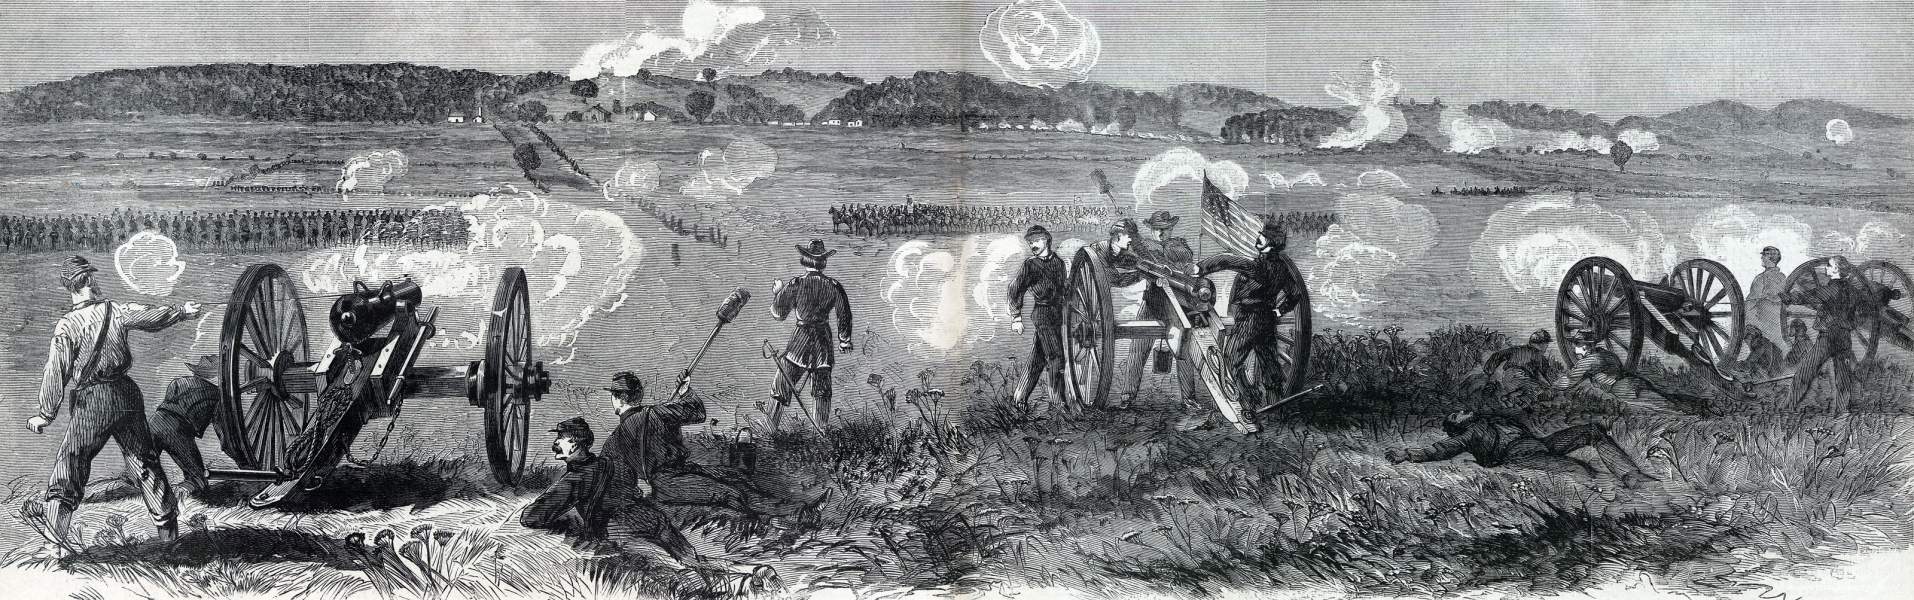 Union forces probing Confederate defenses near Raccoon Ford, Virginia, September 14, 1863, artist's impression, zoomable image